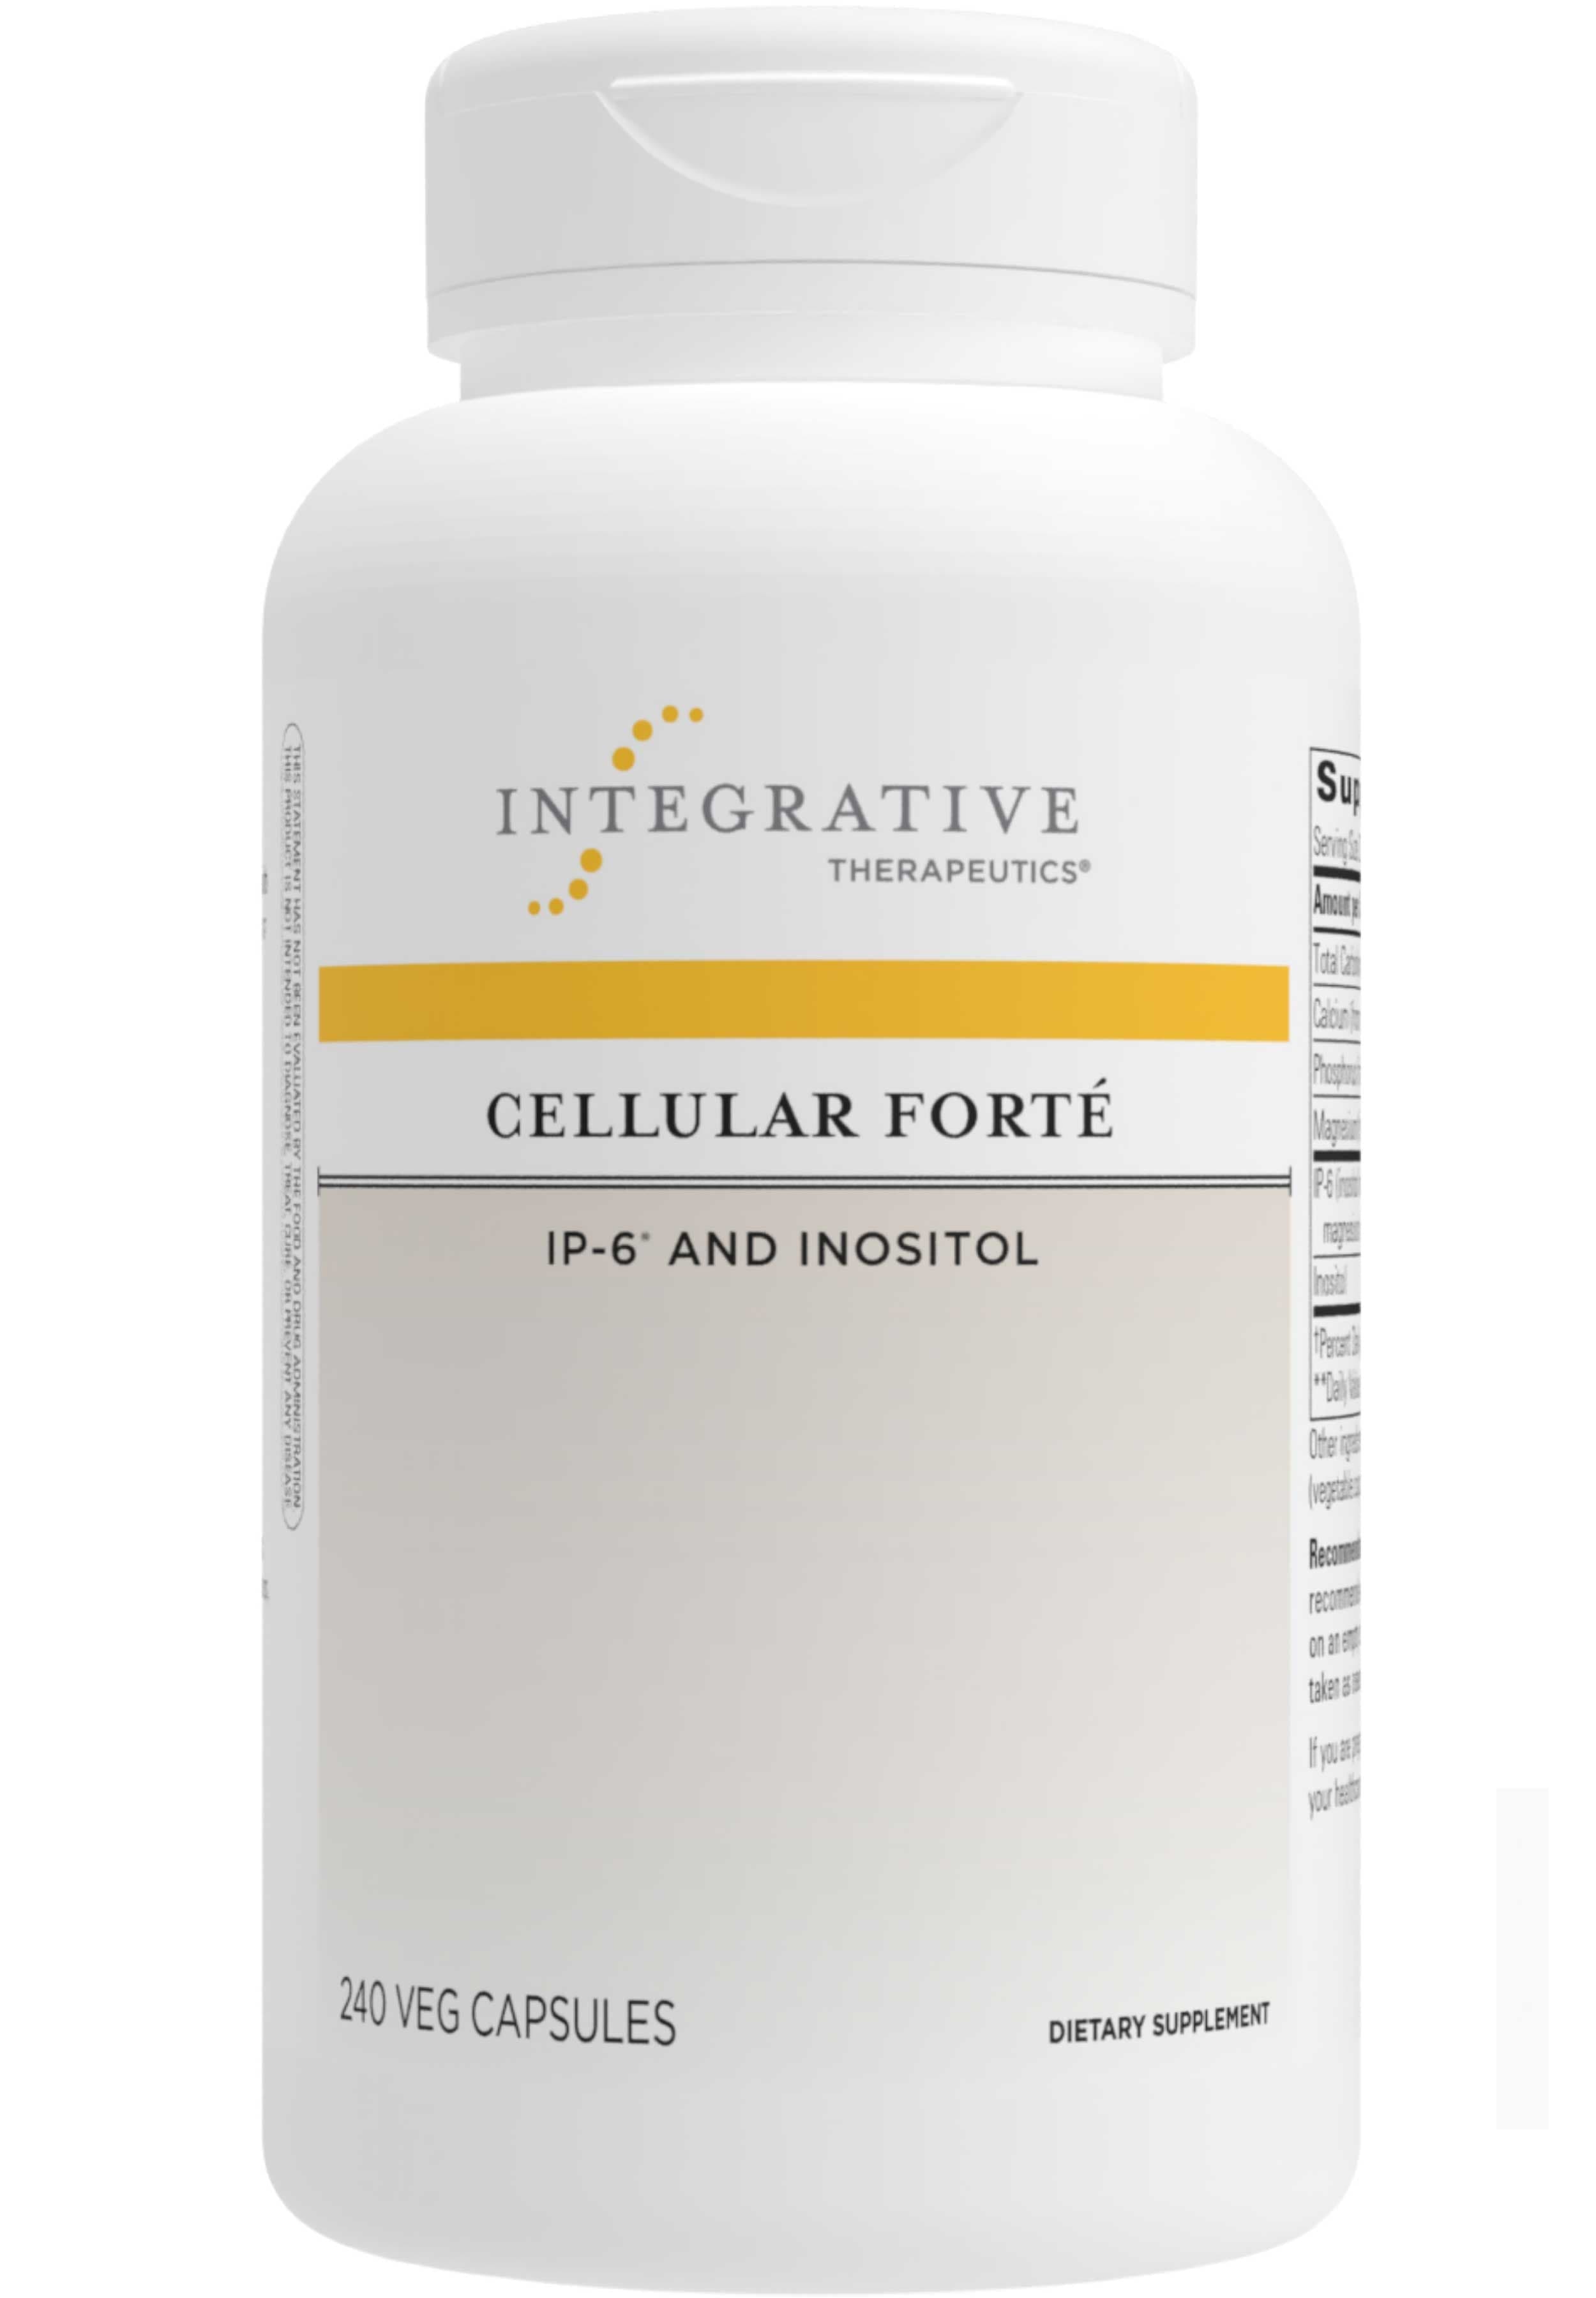 Integrative Therapeutics Cellular Forte with IP-6 and Inositol 